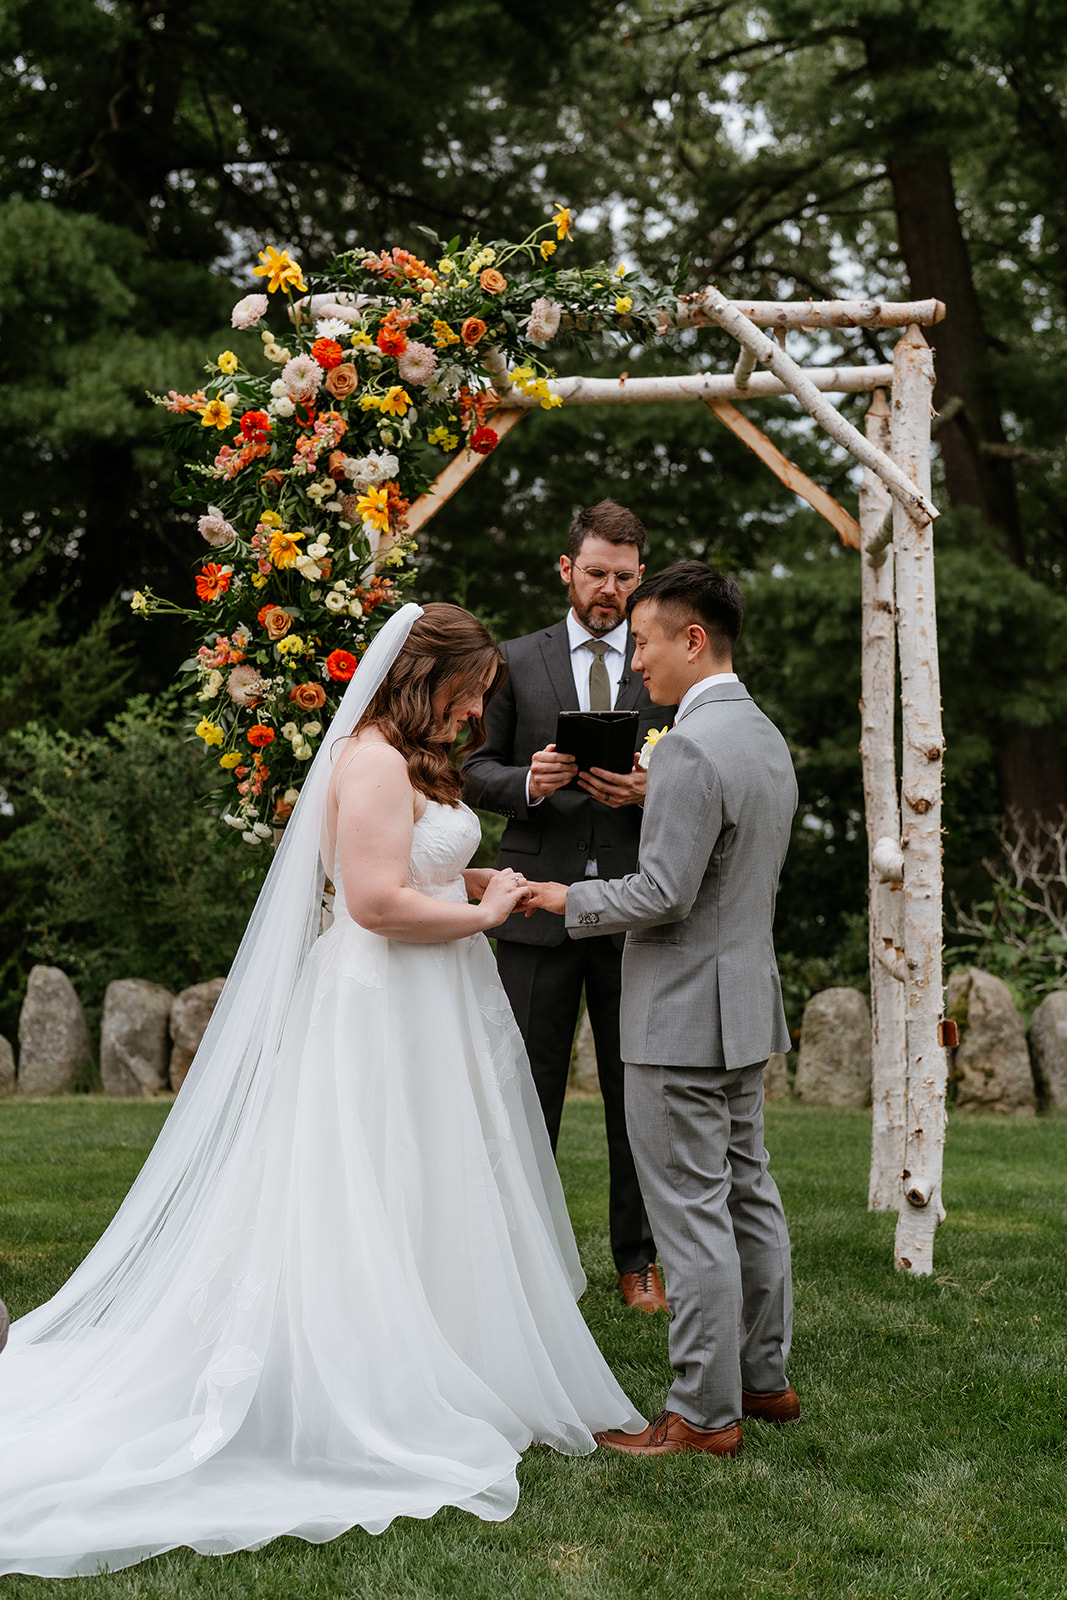 A wedding ceremony in progress with a couple at the altar, an officiant reading, and guests watching at the estate at moraine farm